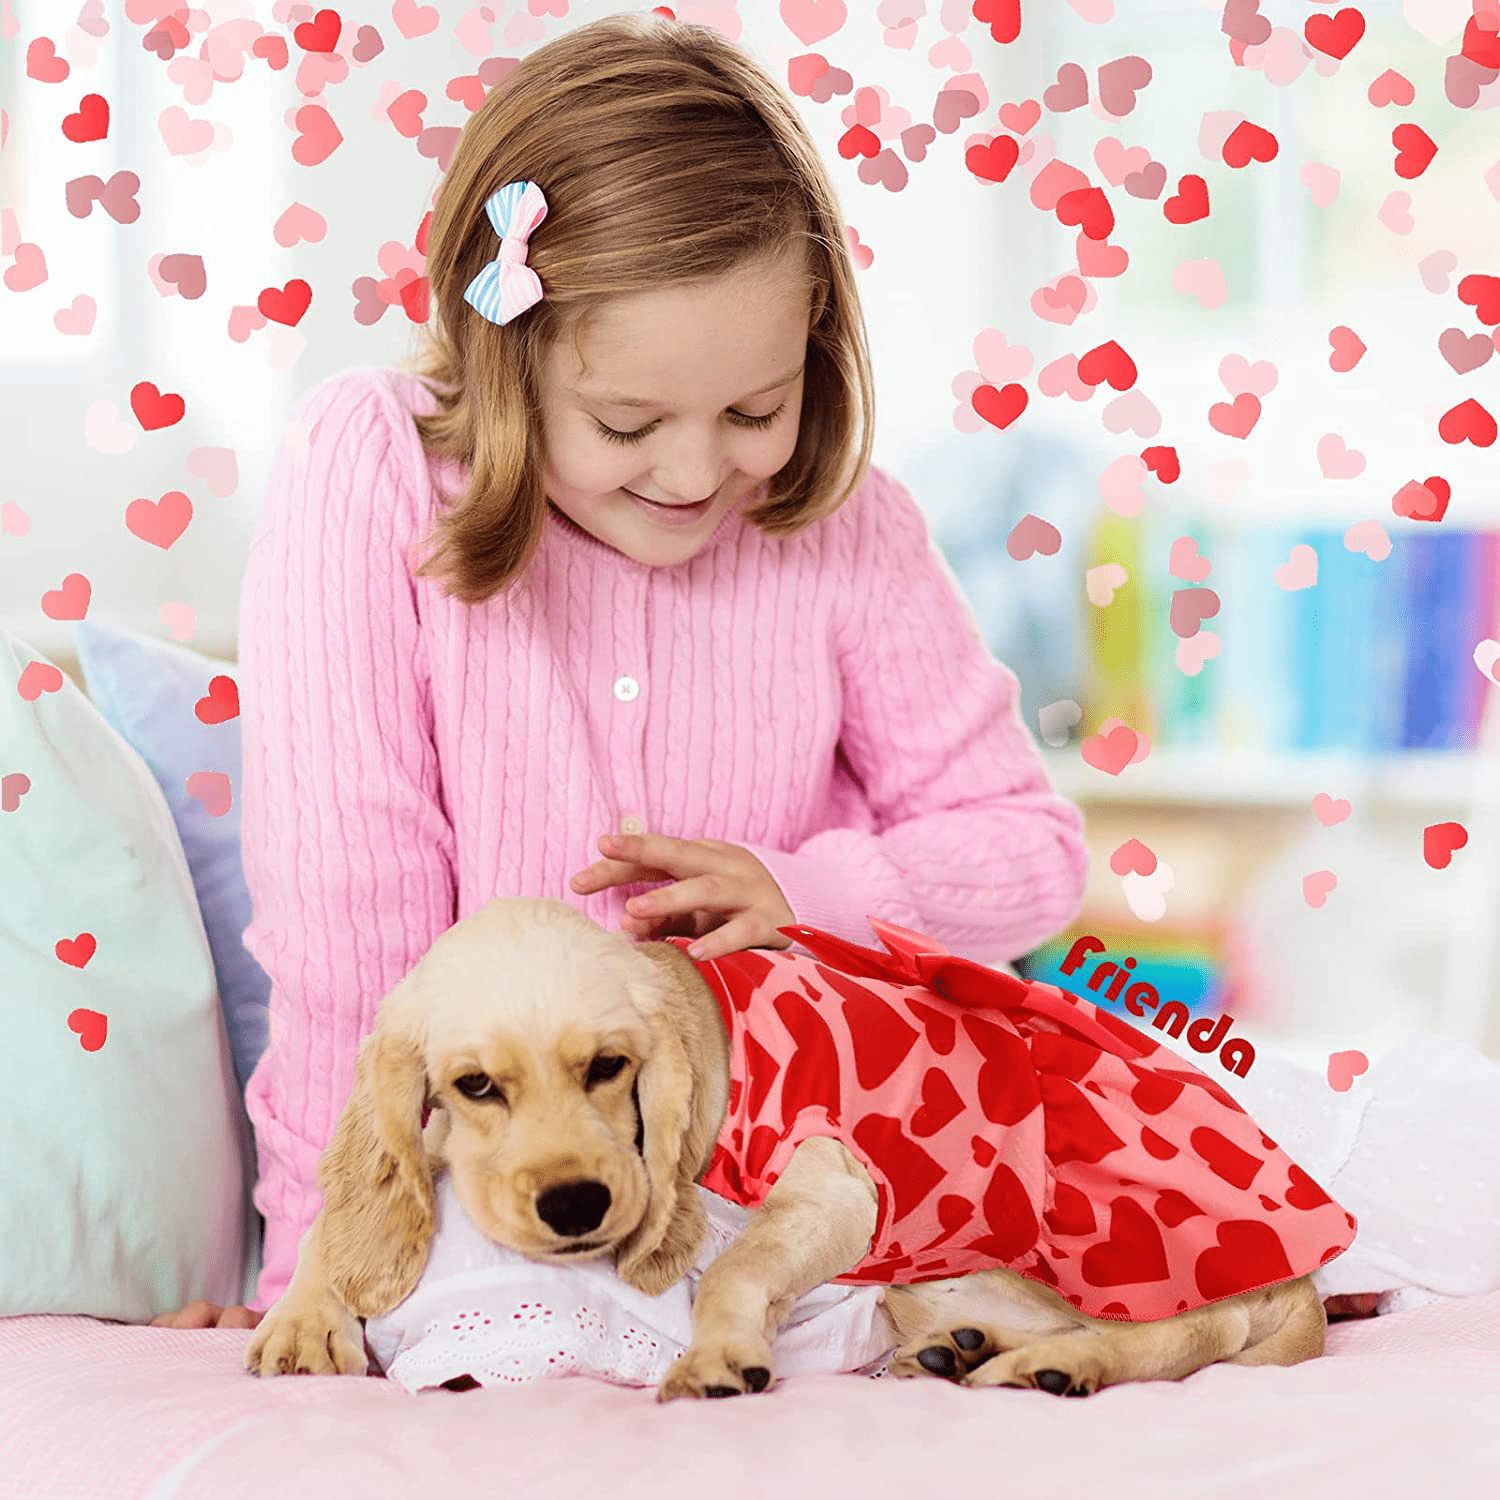 6 Pieces Holiday Dog Dress for Small Dogs Valentine'S Day Pet Dresses St. Patrick'S Day Skirts Dog Bowknot Dresses Puppy Festival Skirts Cute Pet Apparel Boy Girl Clothes for Dogs Cats Pet